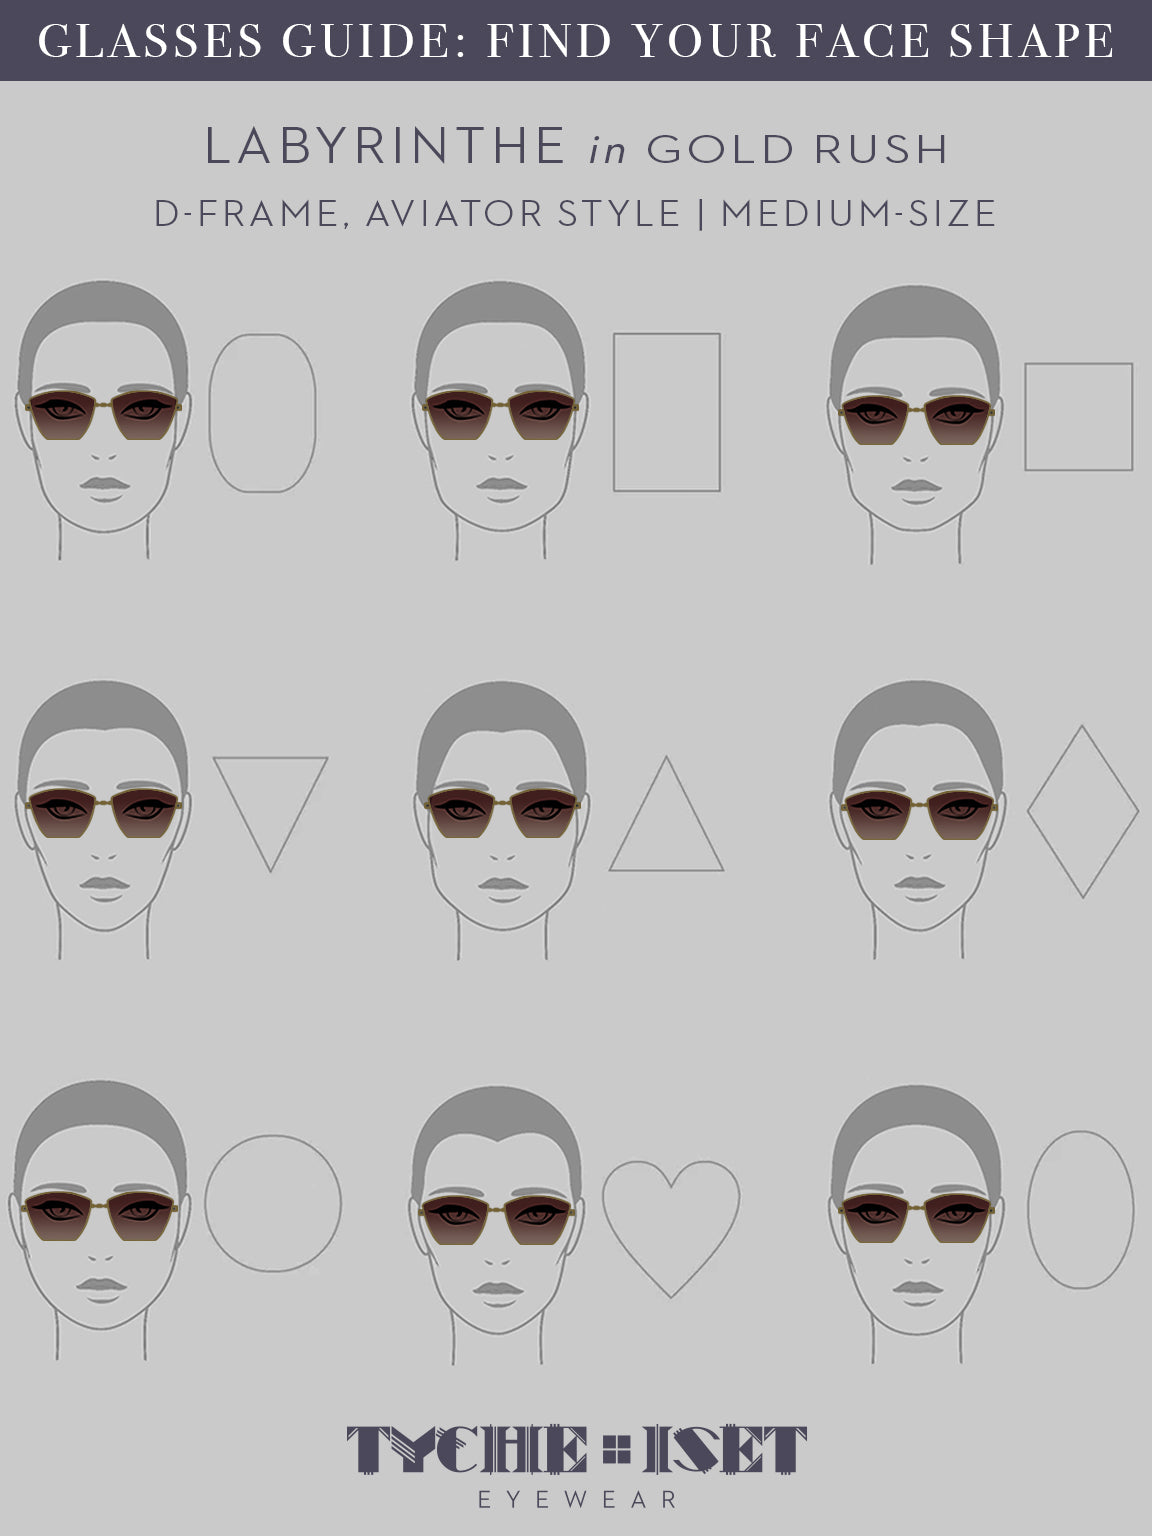 FACE SHAPE SUNGLASSES GUIDE, EYEWEAR FACE SHAPE GUIDE, Lightweight titanium glasses, strong titanium sunglasses, sunglasses & optical, luxury eyewear, mazzucchelli italian acetate, made in japan, mythology, eyewear designer, woman owned small business, summer accessories, chic style, celebrity style, aviator glasses, d-frame eyewear, cat eye sunglasses, art deco, geometric art, GOLD glasses, GOLD SUNGLASSES